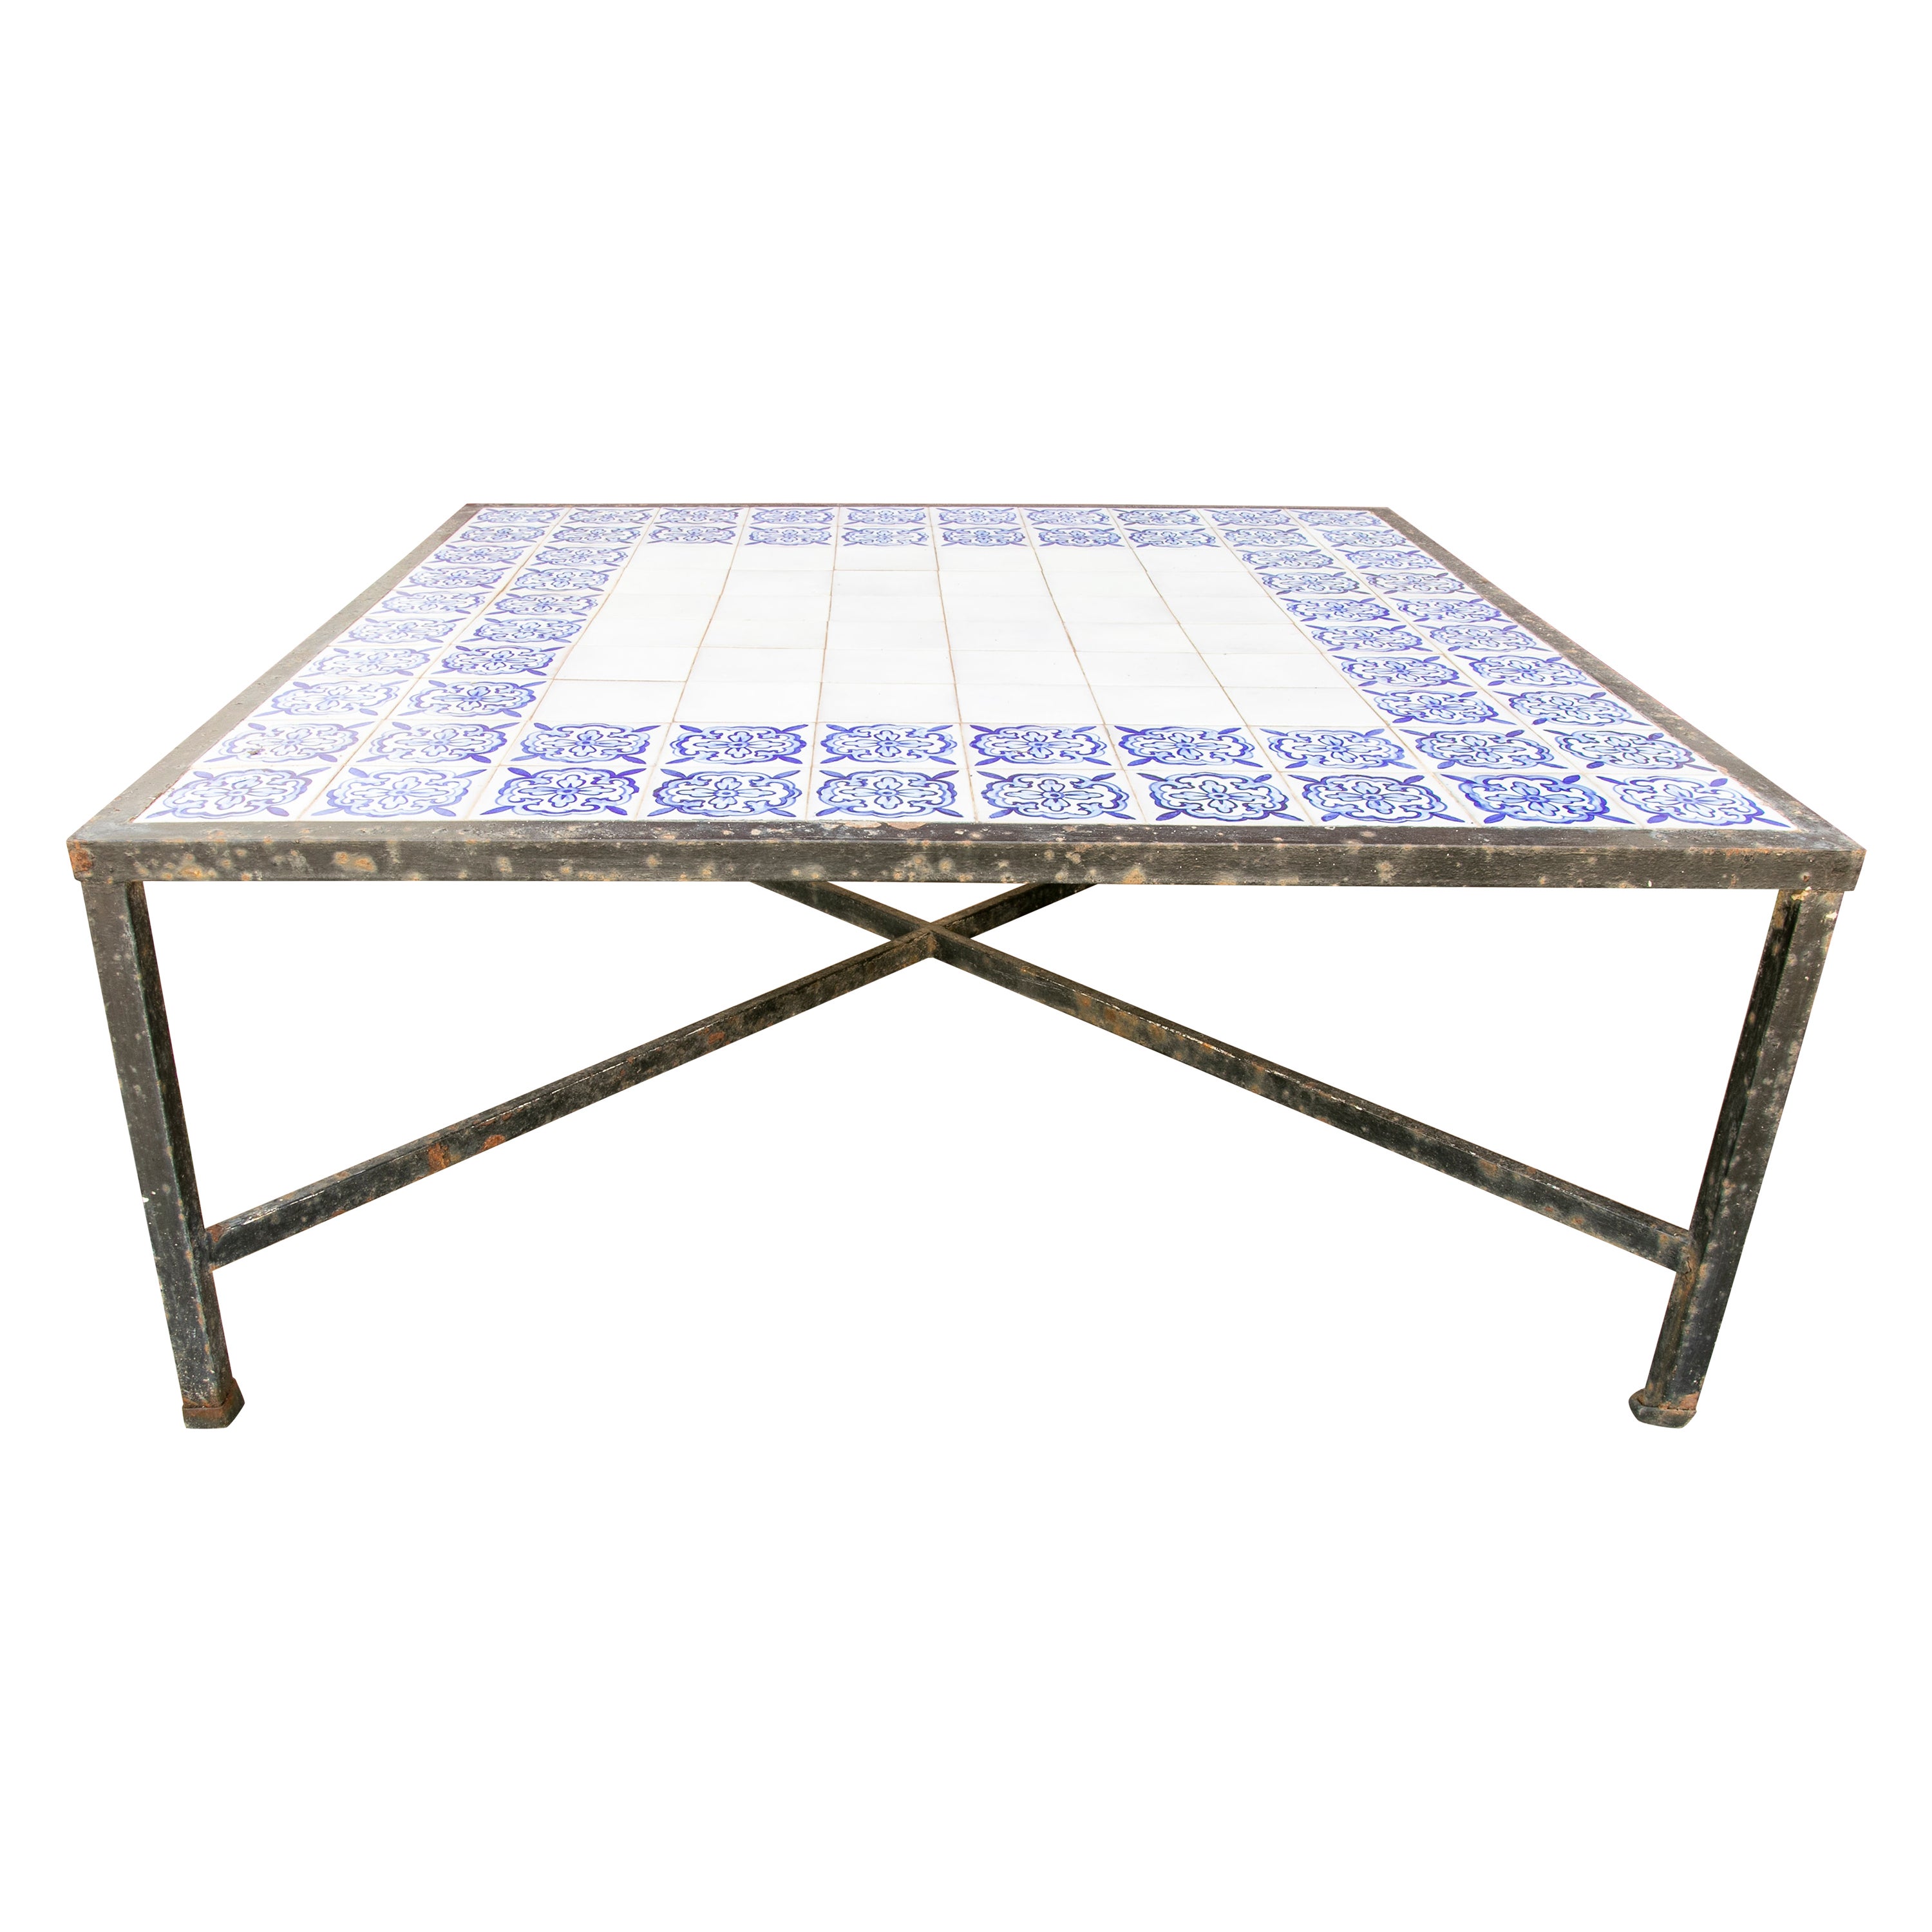 1980s Table with Iron Base and Geometrical Tiles on Top 